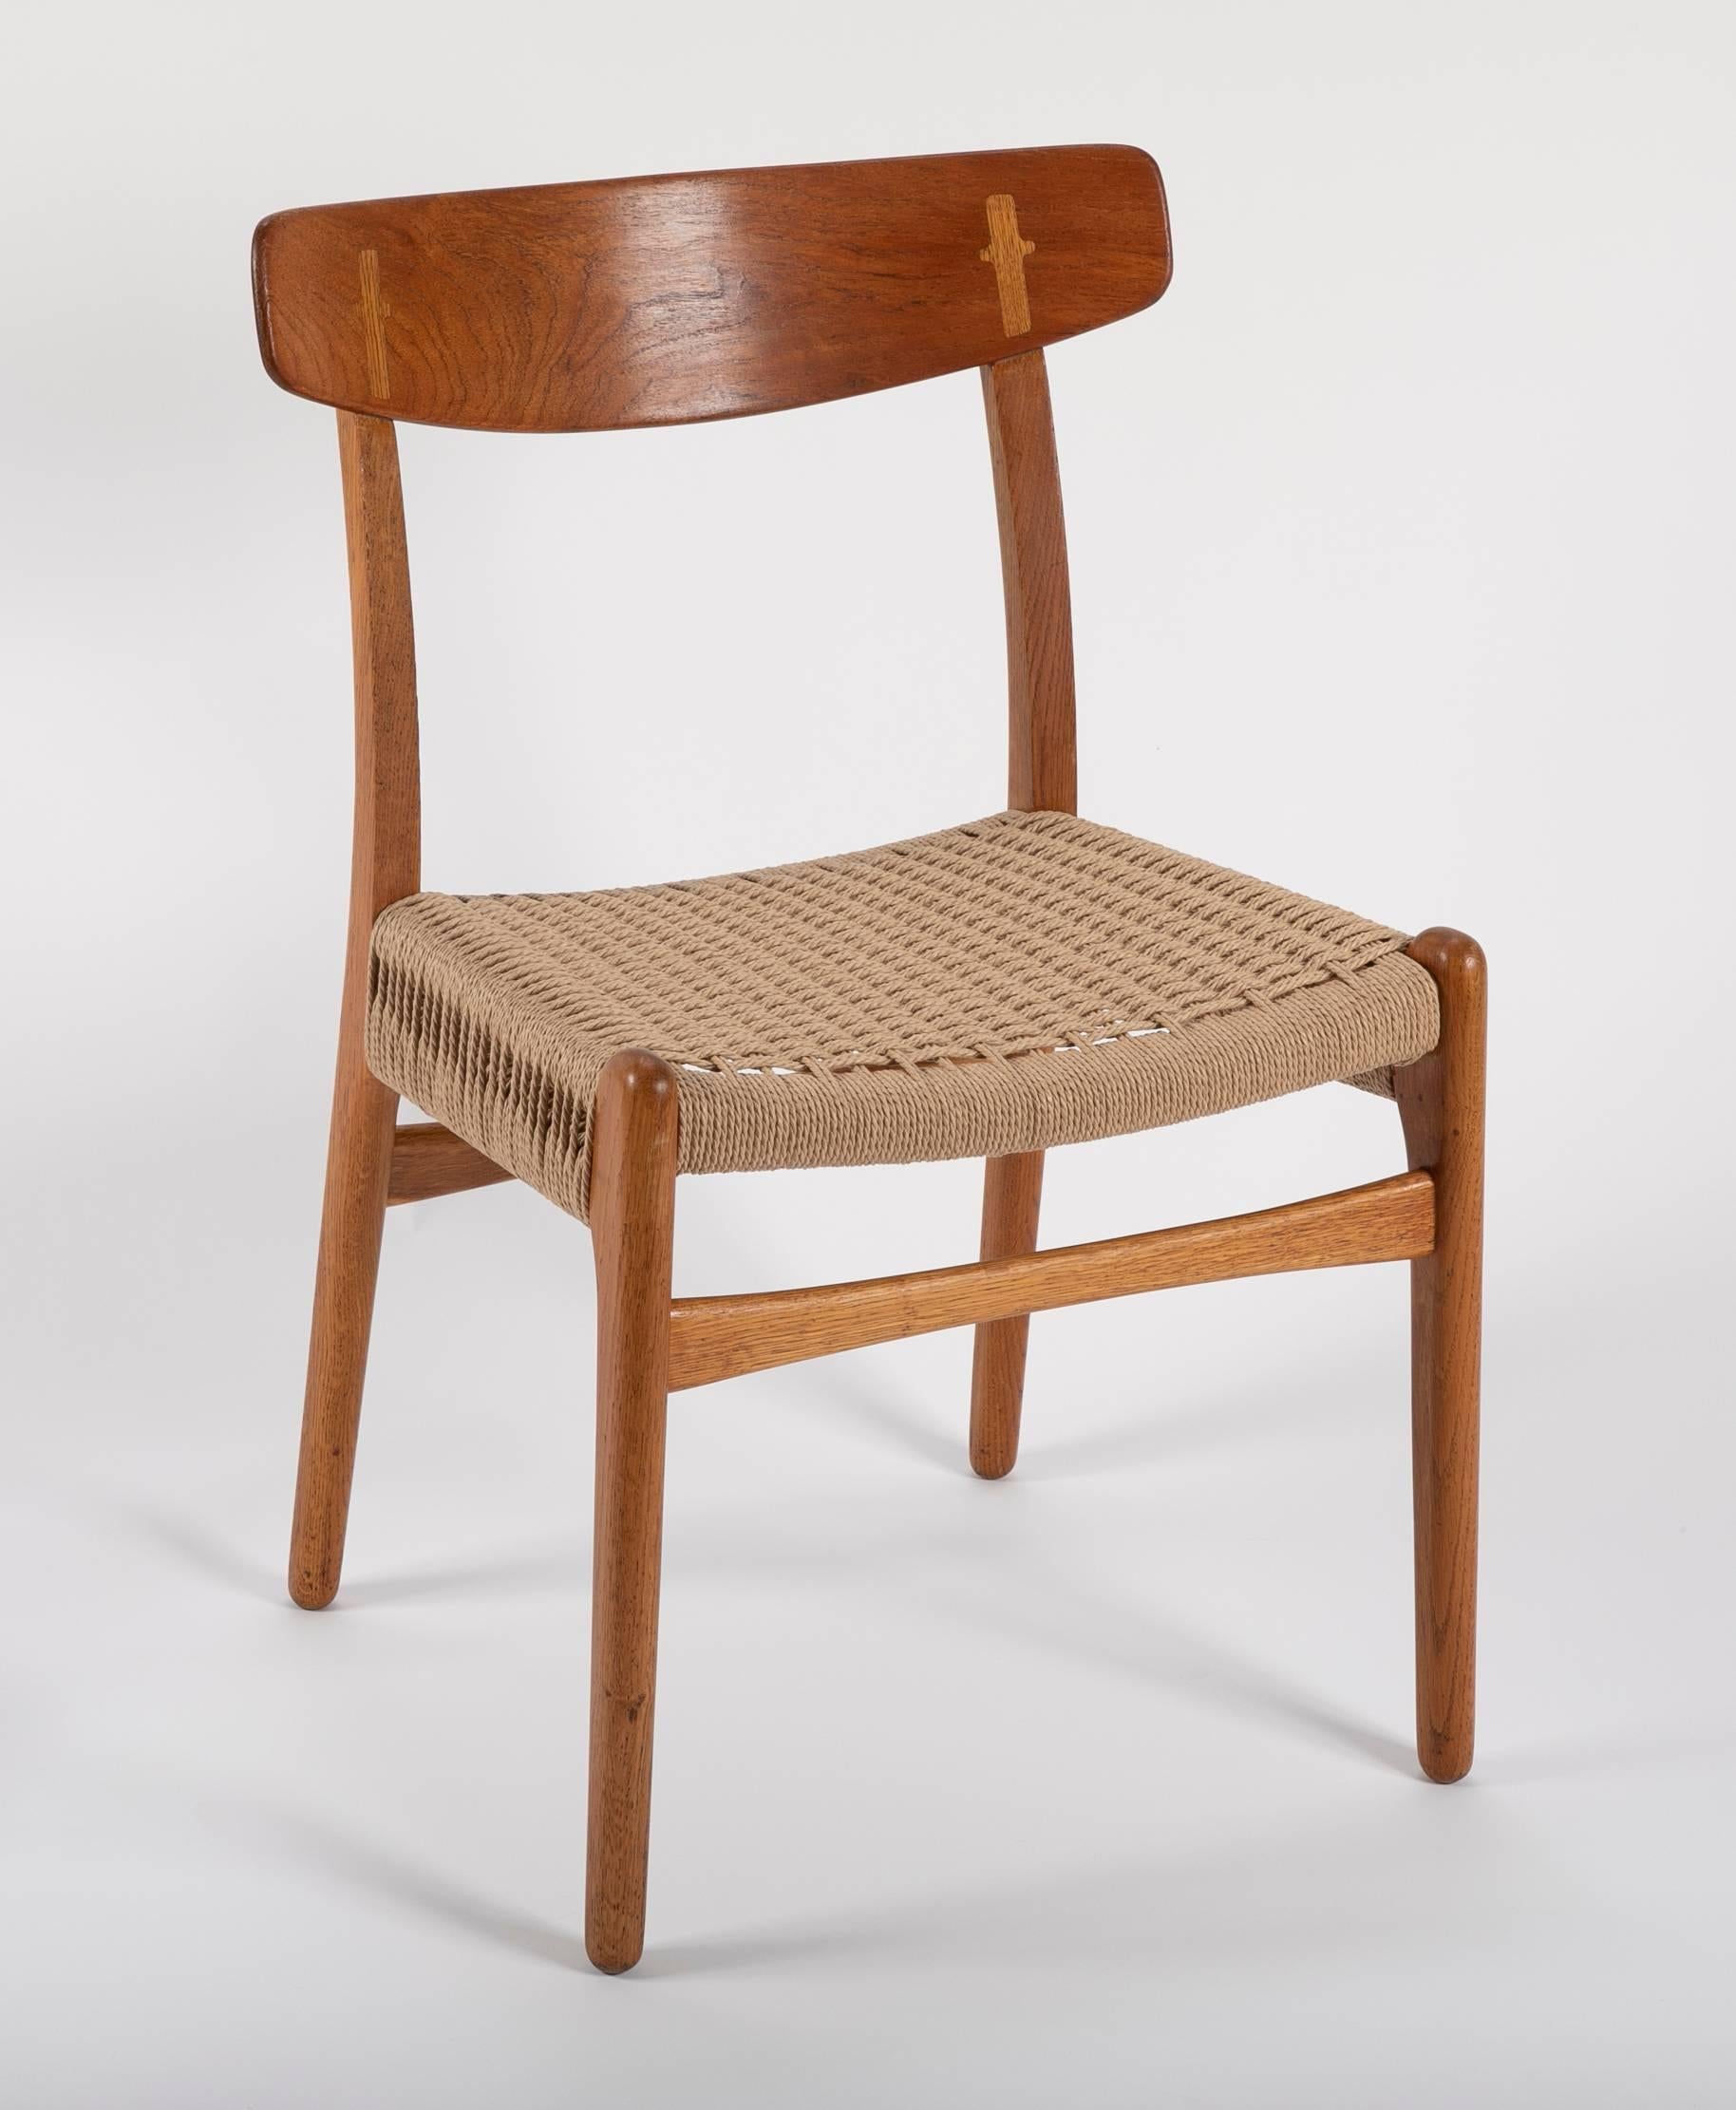 A large set of ten Hans Wegner oak CH-23 dining chairs designed in 1951 and produced by Carl Hansen & Son in Denmark. This set has had all of the seats newly reupholstered using the correct paper coard and seat weaving patter.